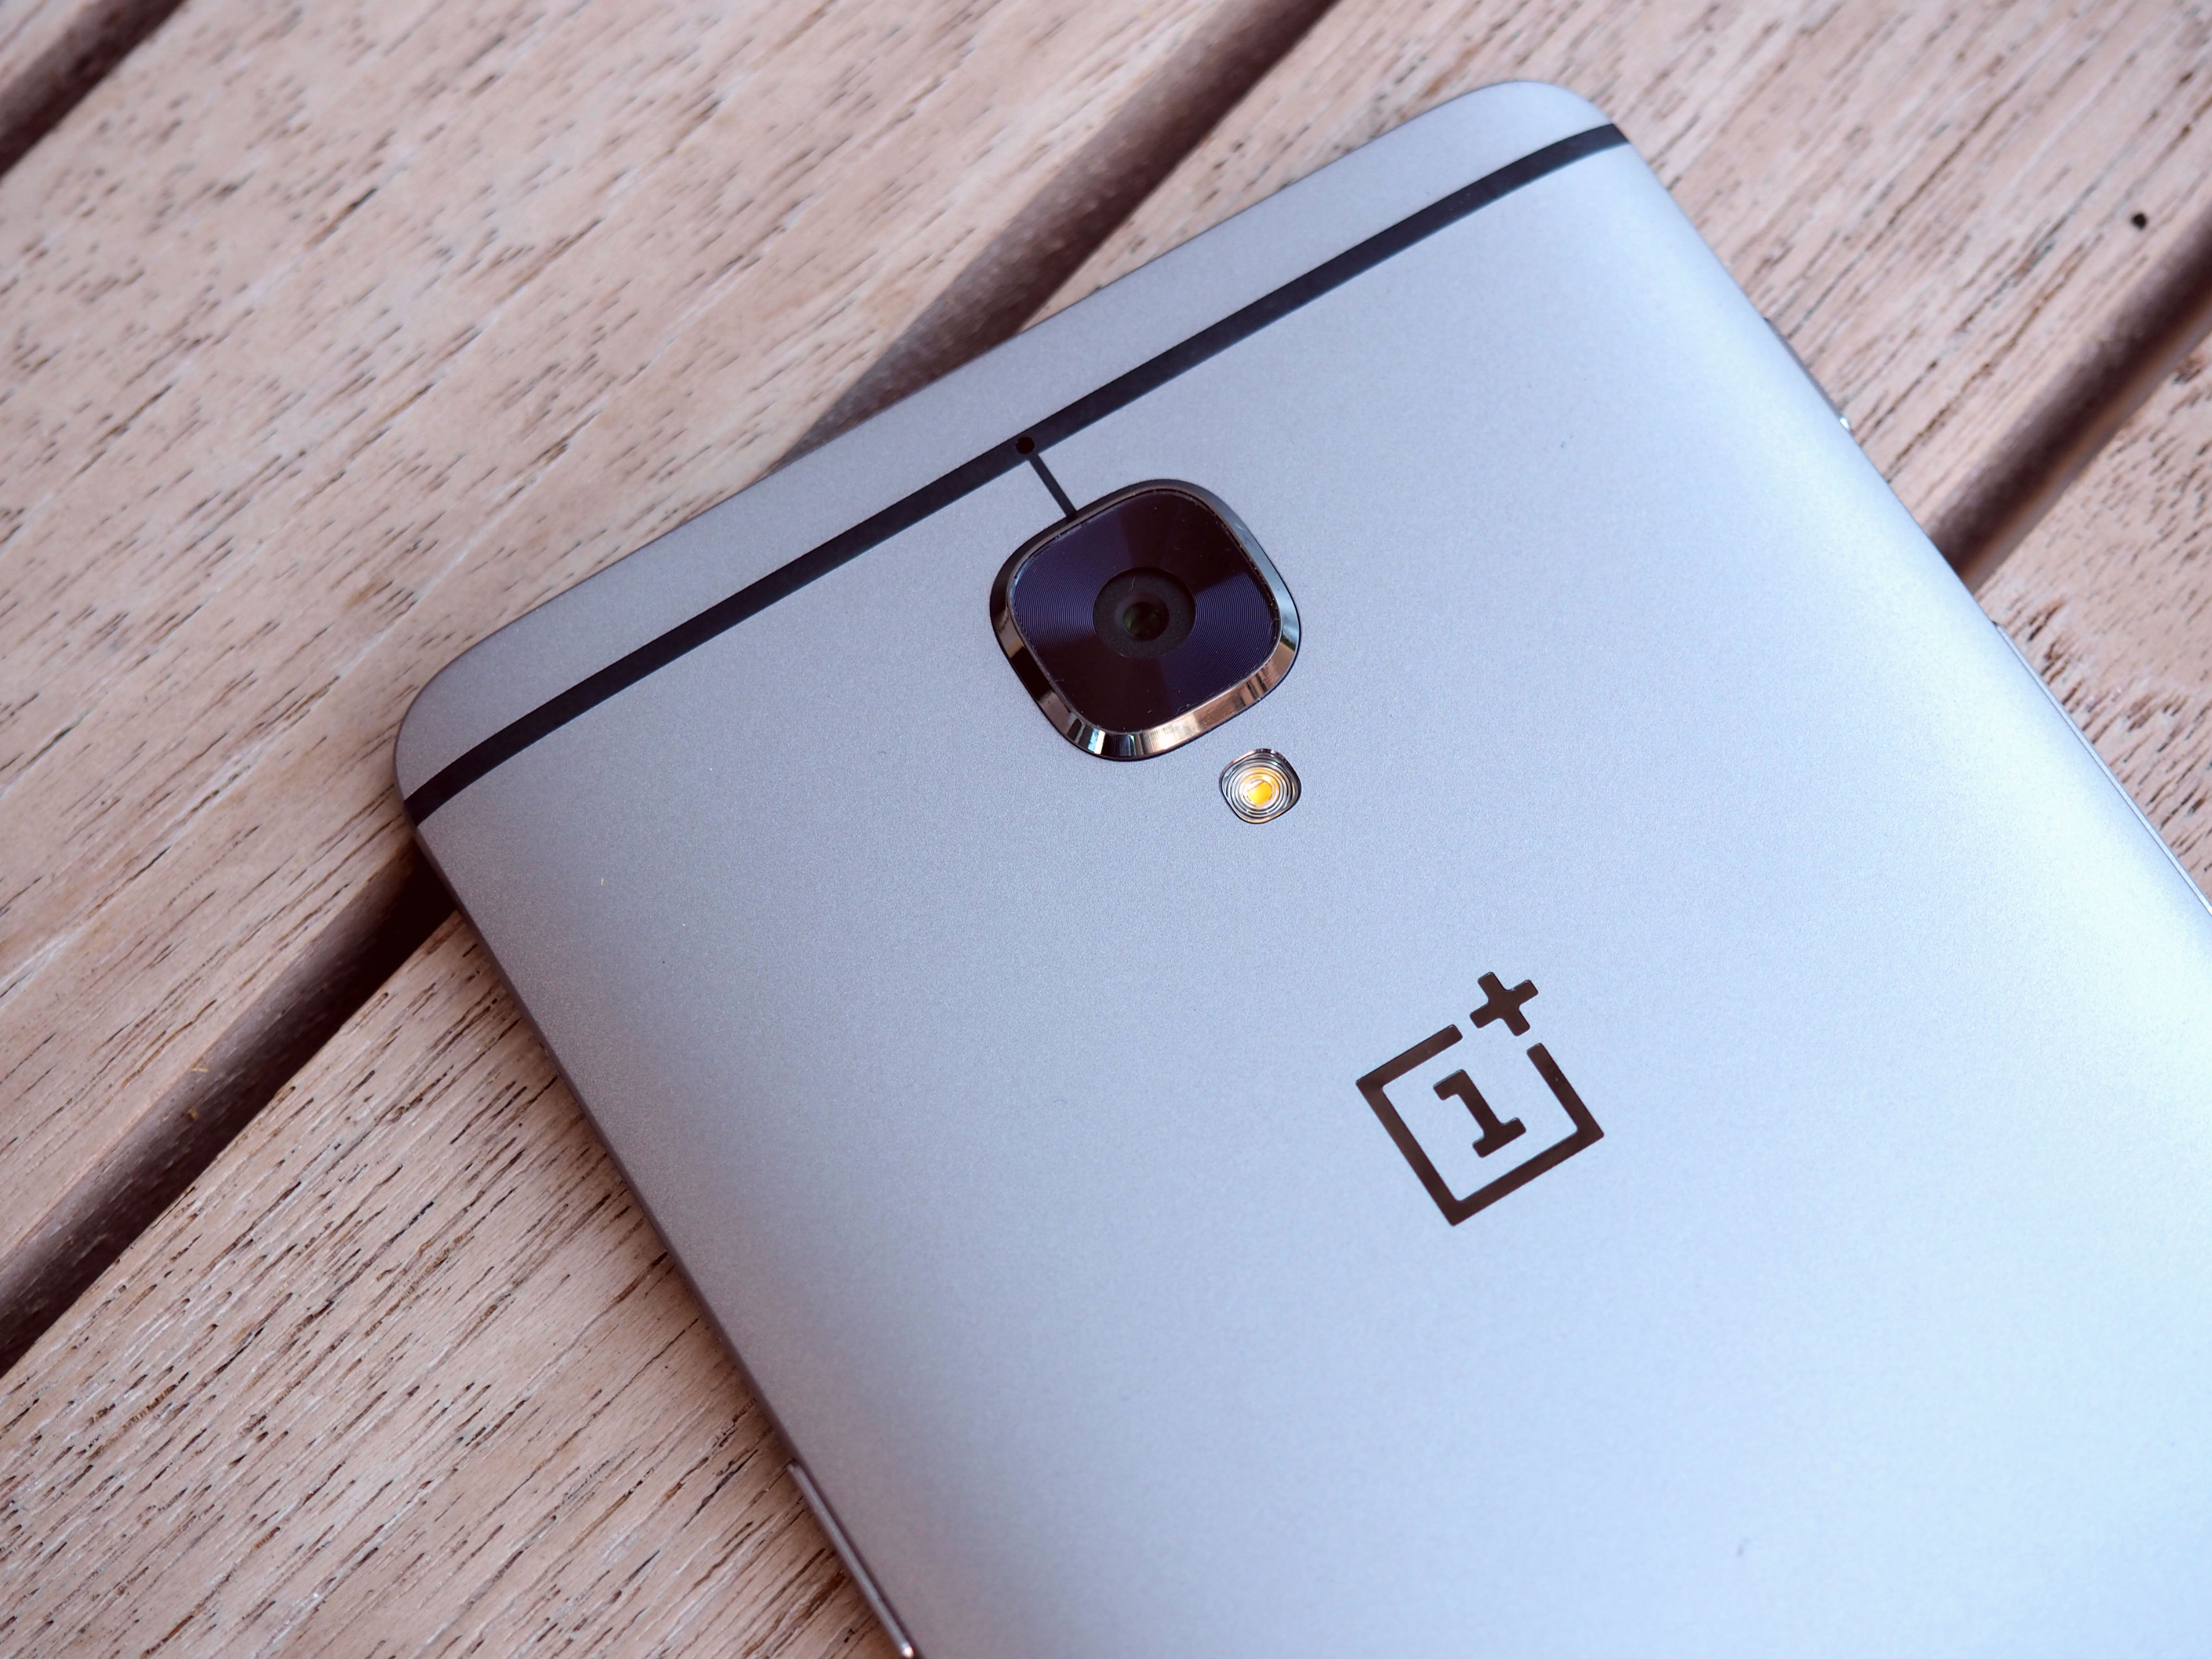 OnePlus confirms up to 40,000 customers were impacted by credit card hack